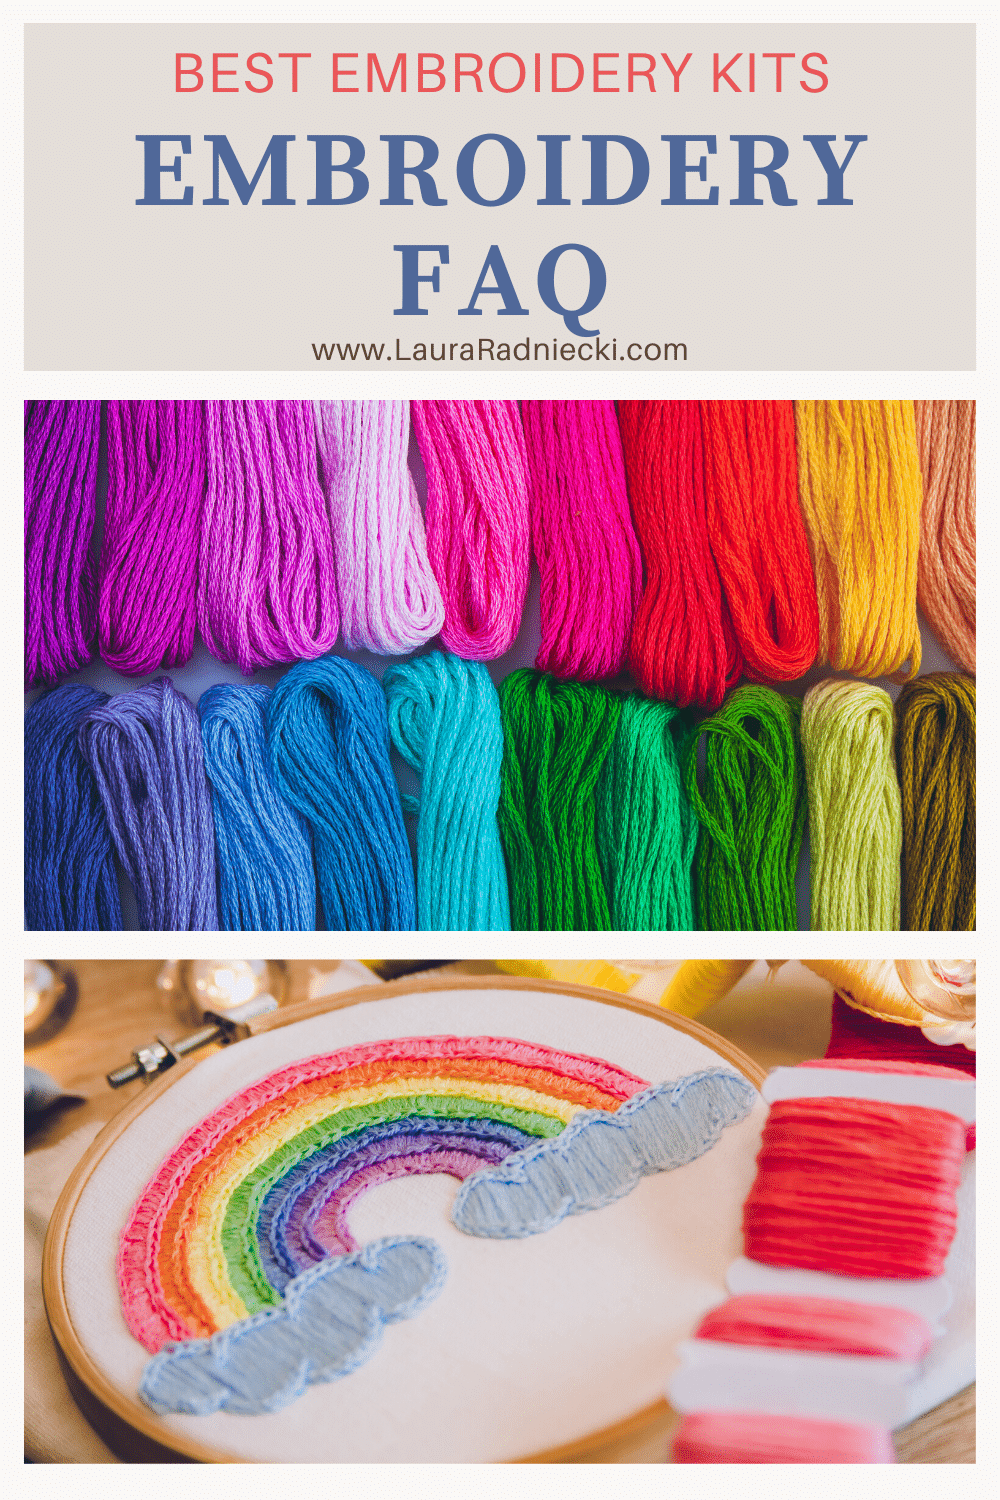 Embroidery FAQ | The Best Embroidery Kits for Beginners